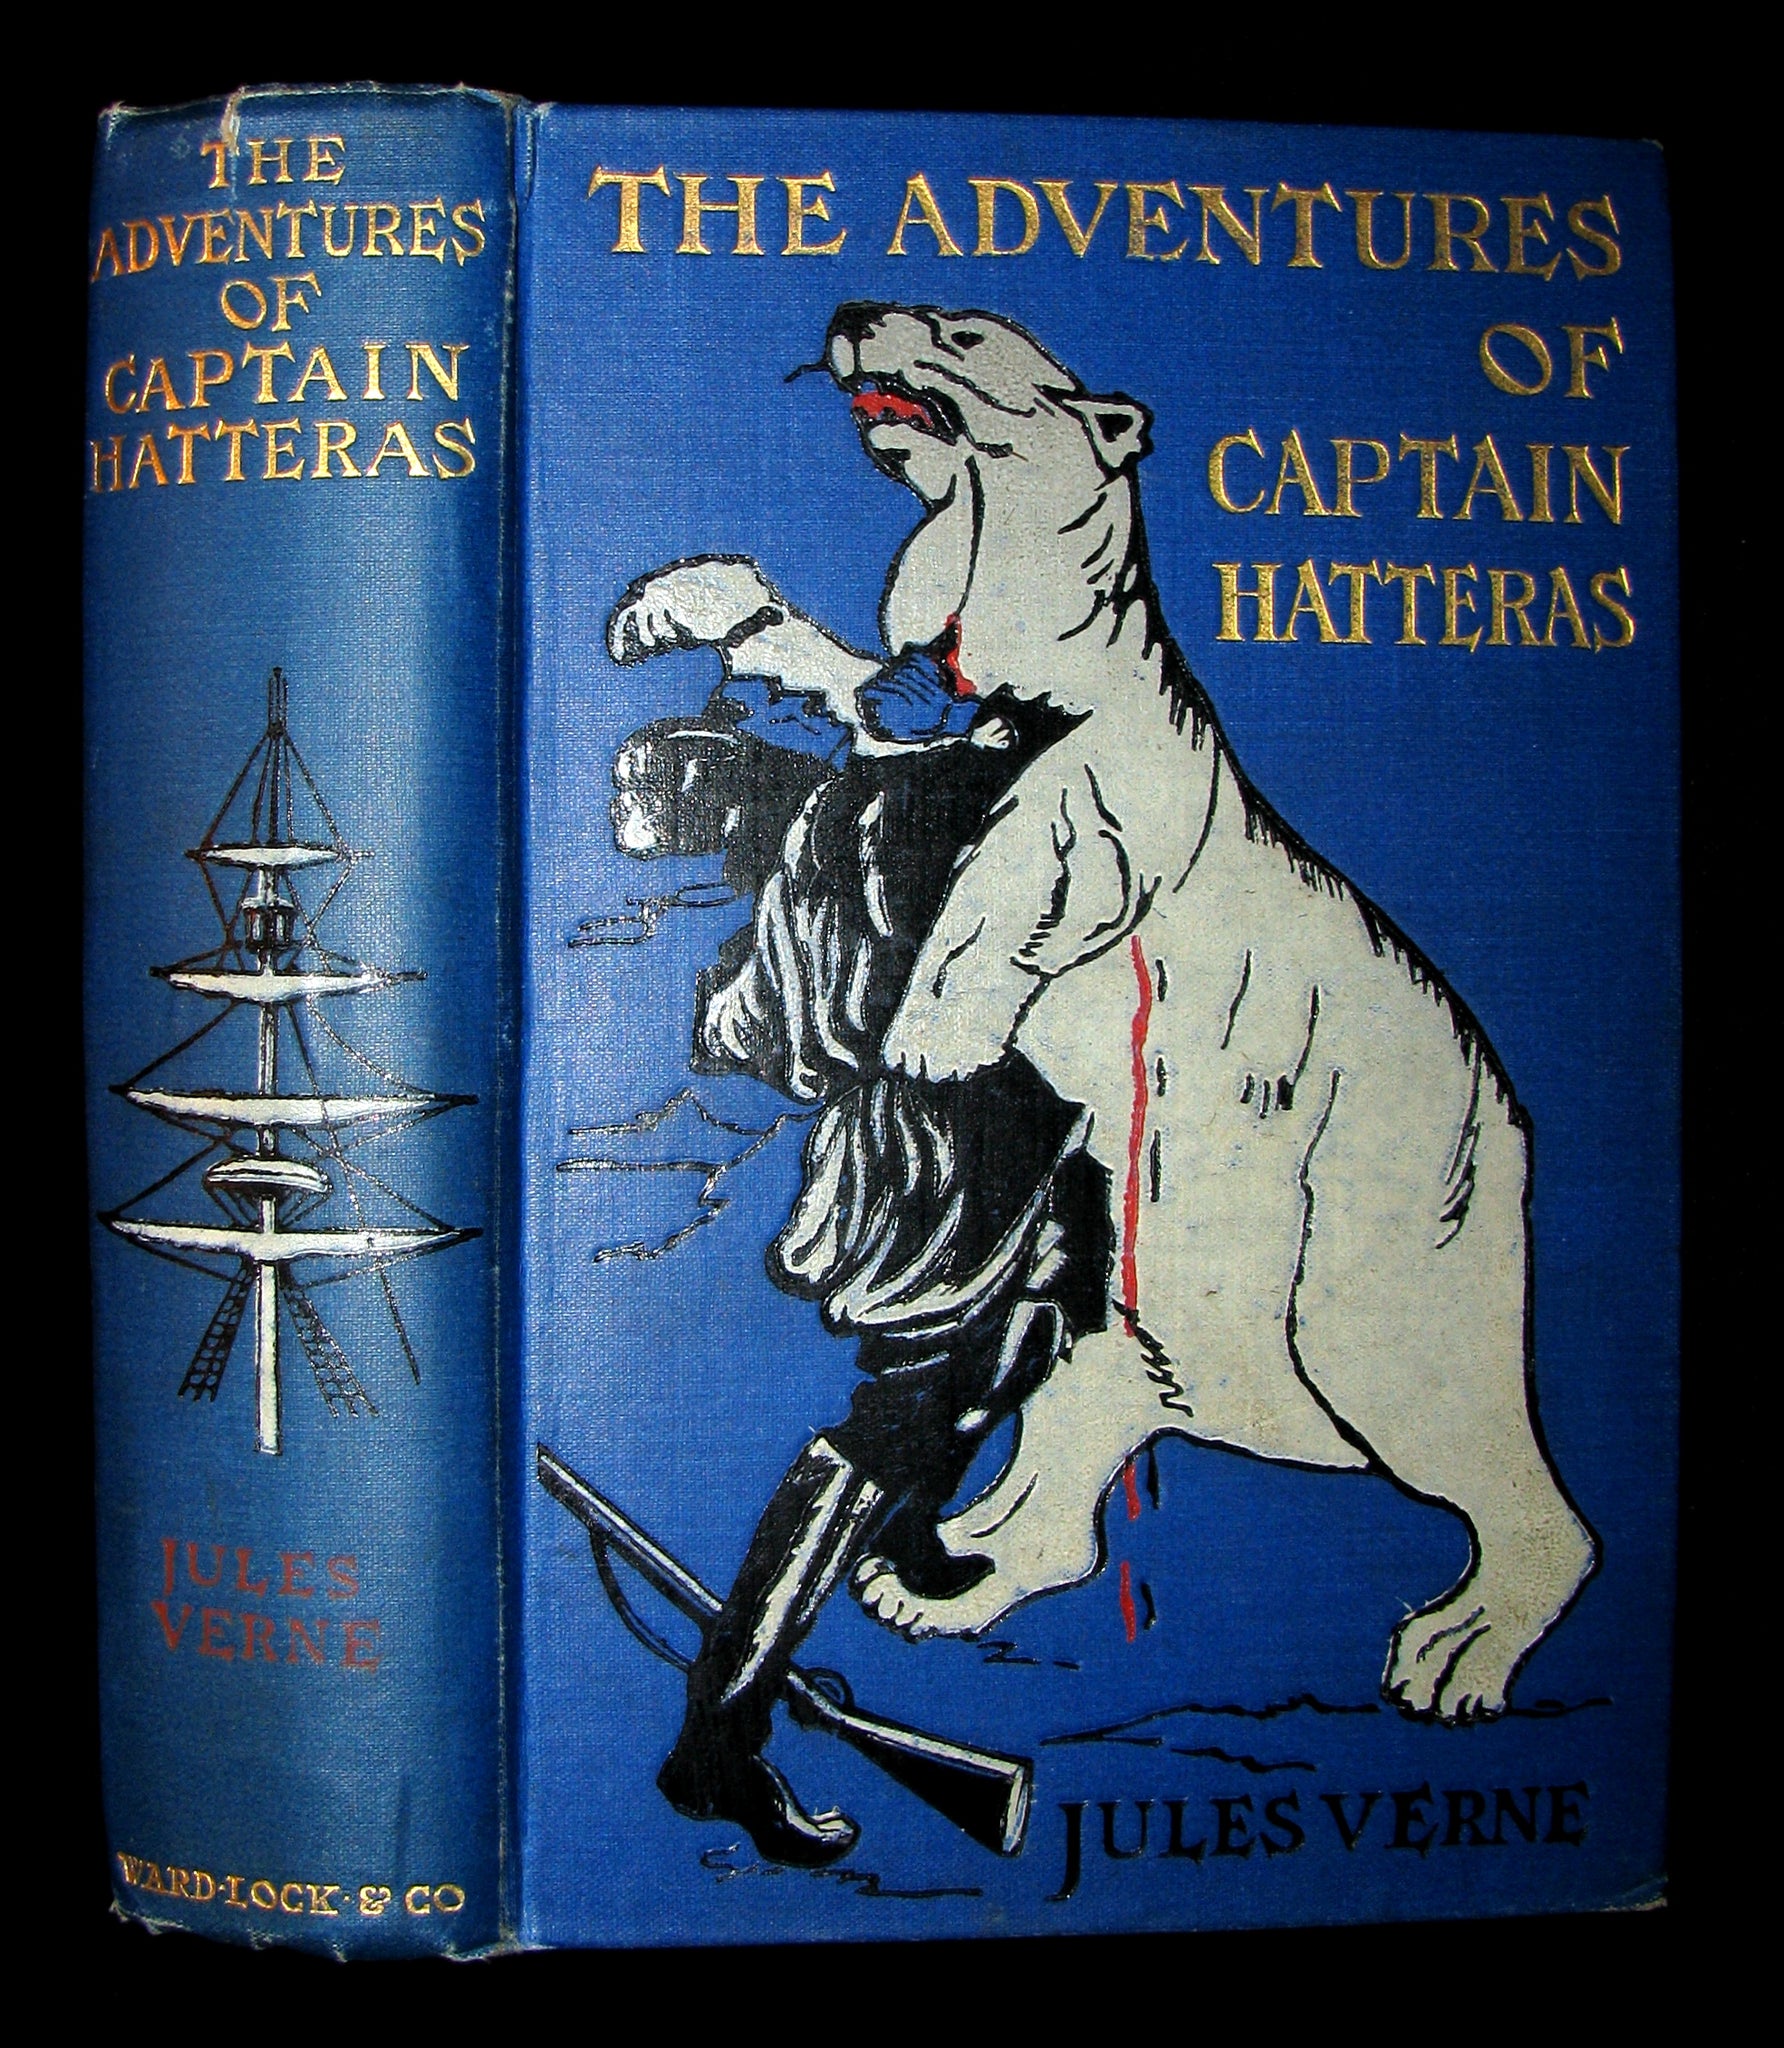 1910 Rare Book - JULES VERNE - The Adventures of Captain Hatteras, Containing 'The English at the North Pole' and 'The Ice Desert'